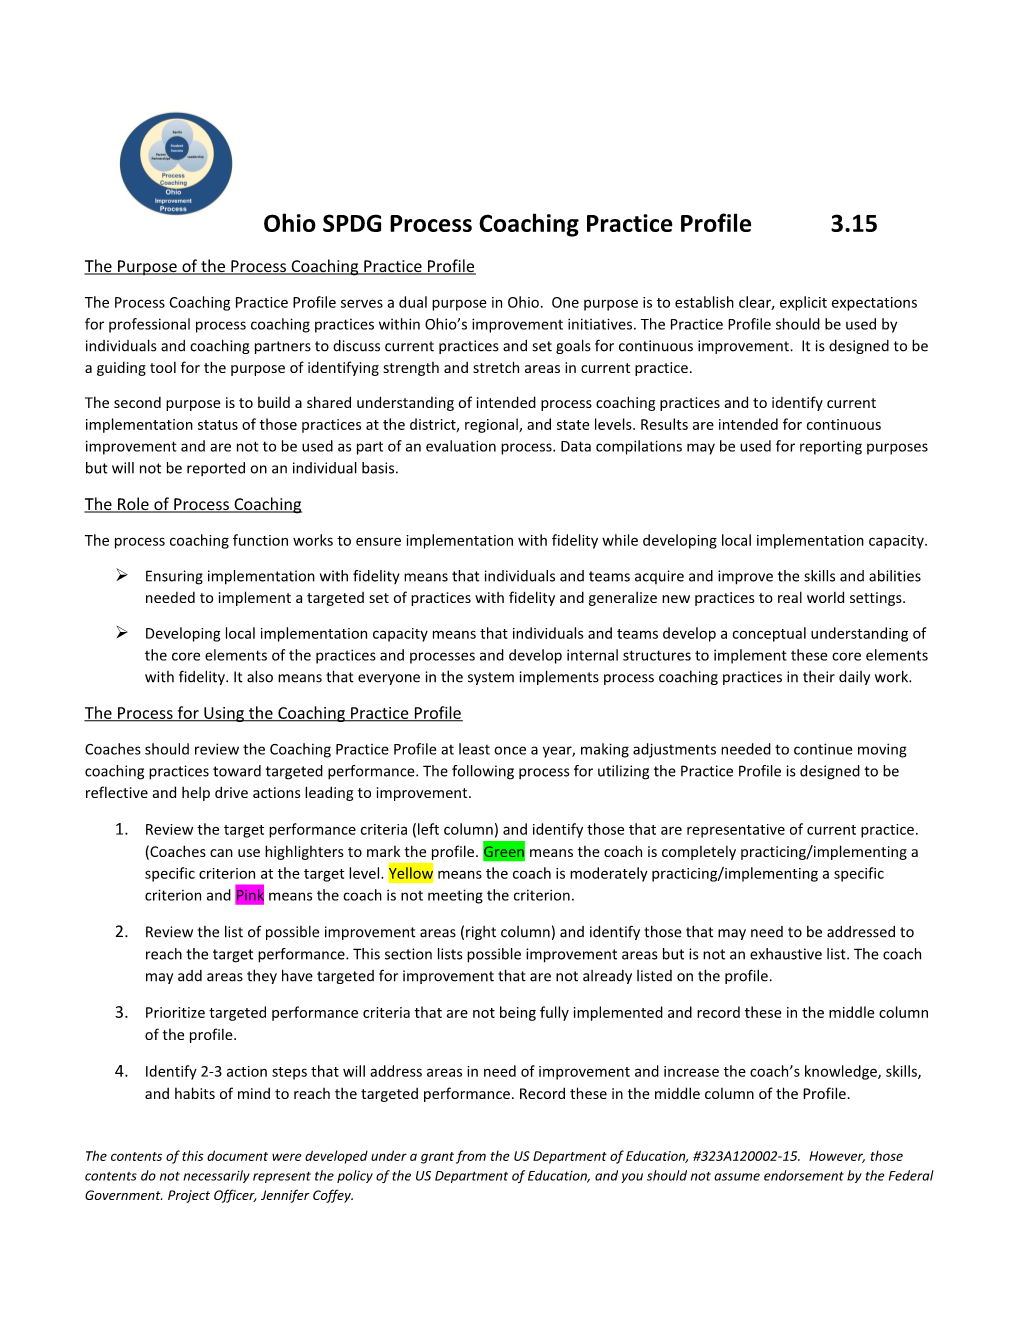 The Purpose of the Process Coaching Practice Profile